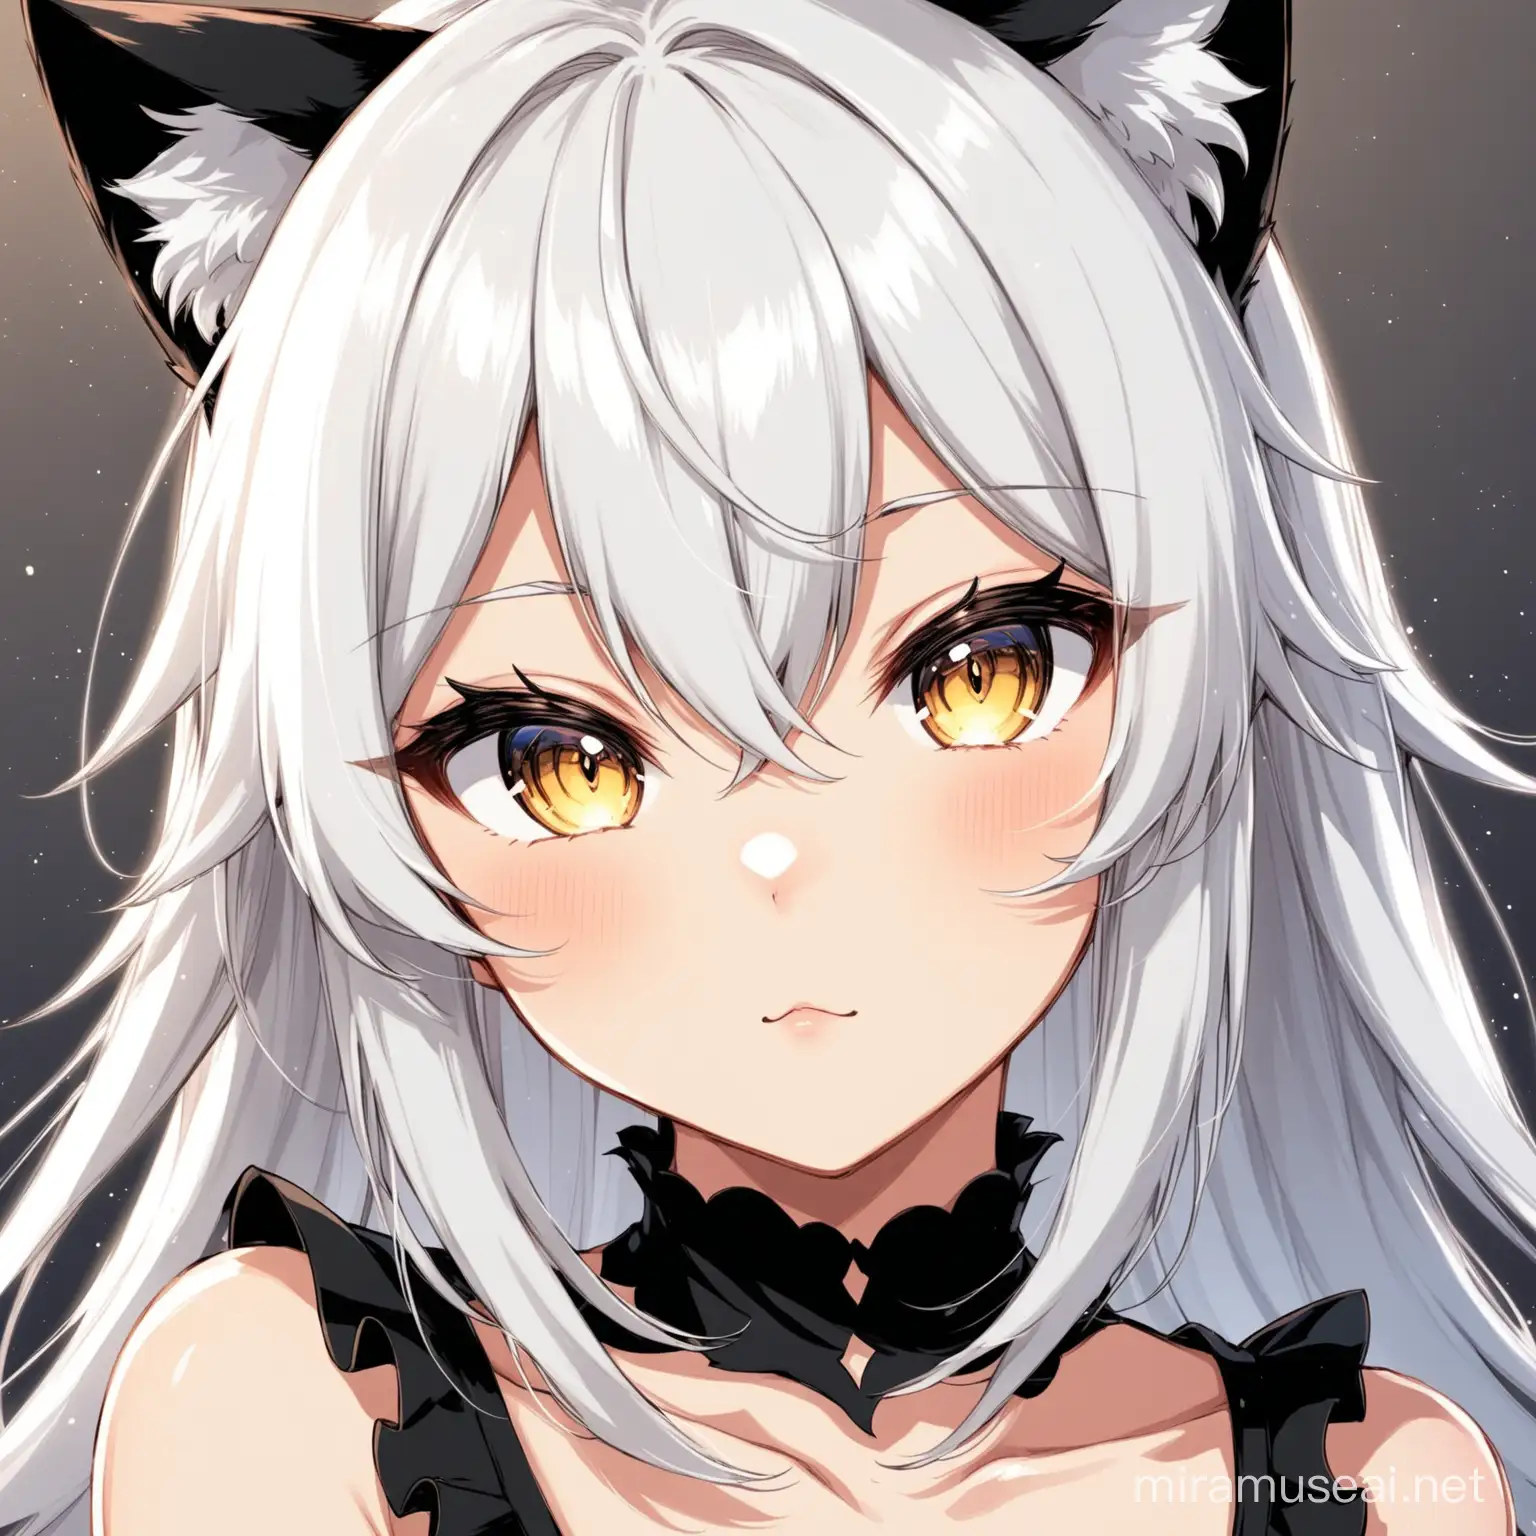 Elegant Catgirl with Striking White and BlackTipped Hair